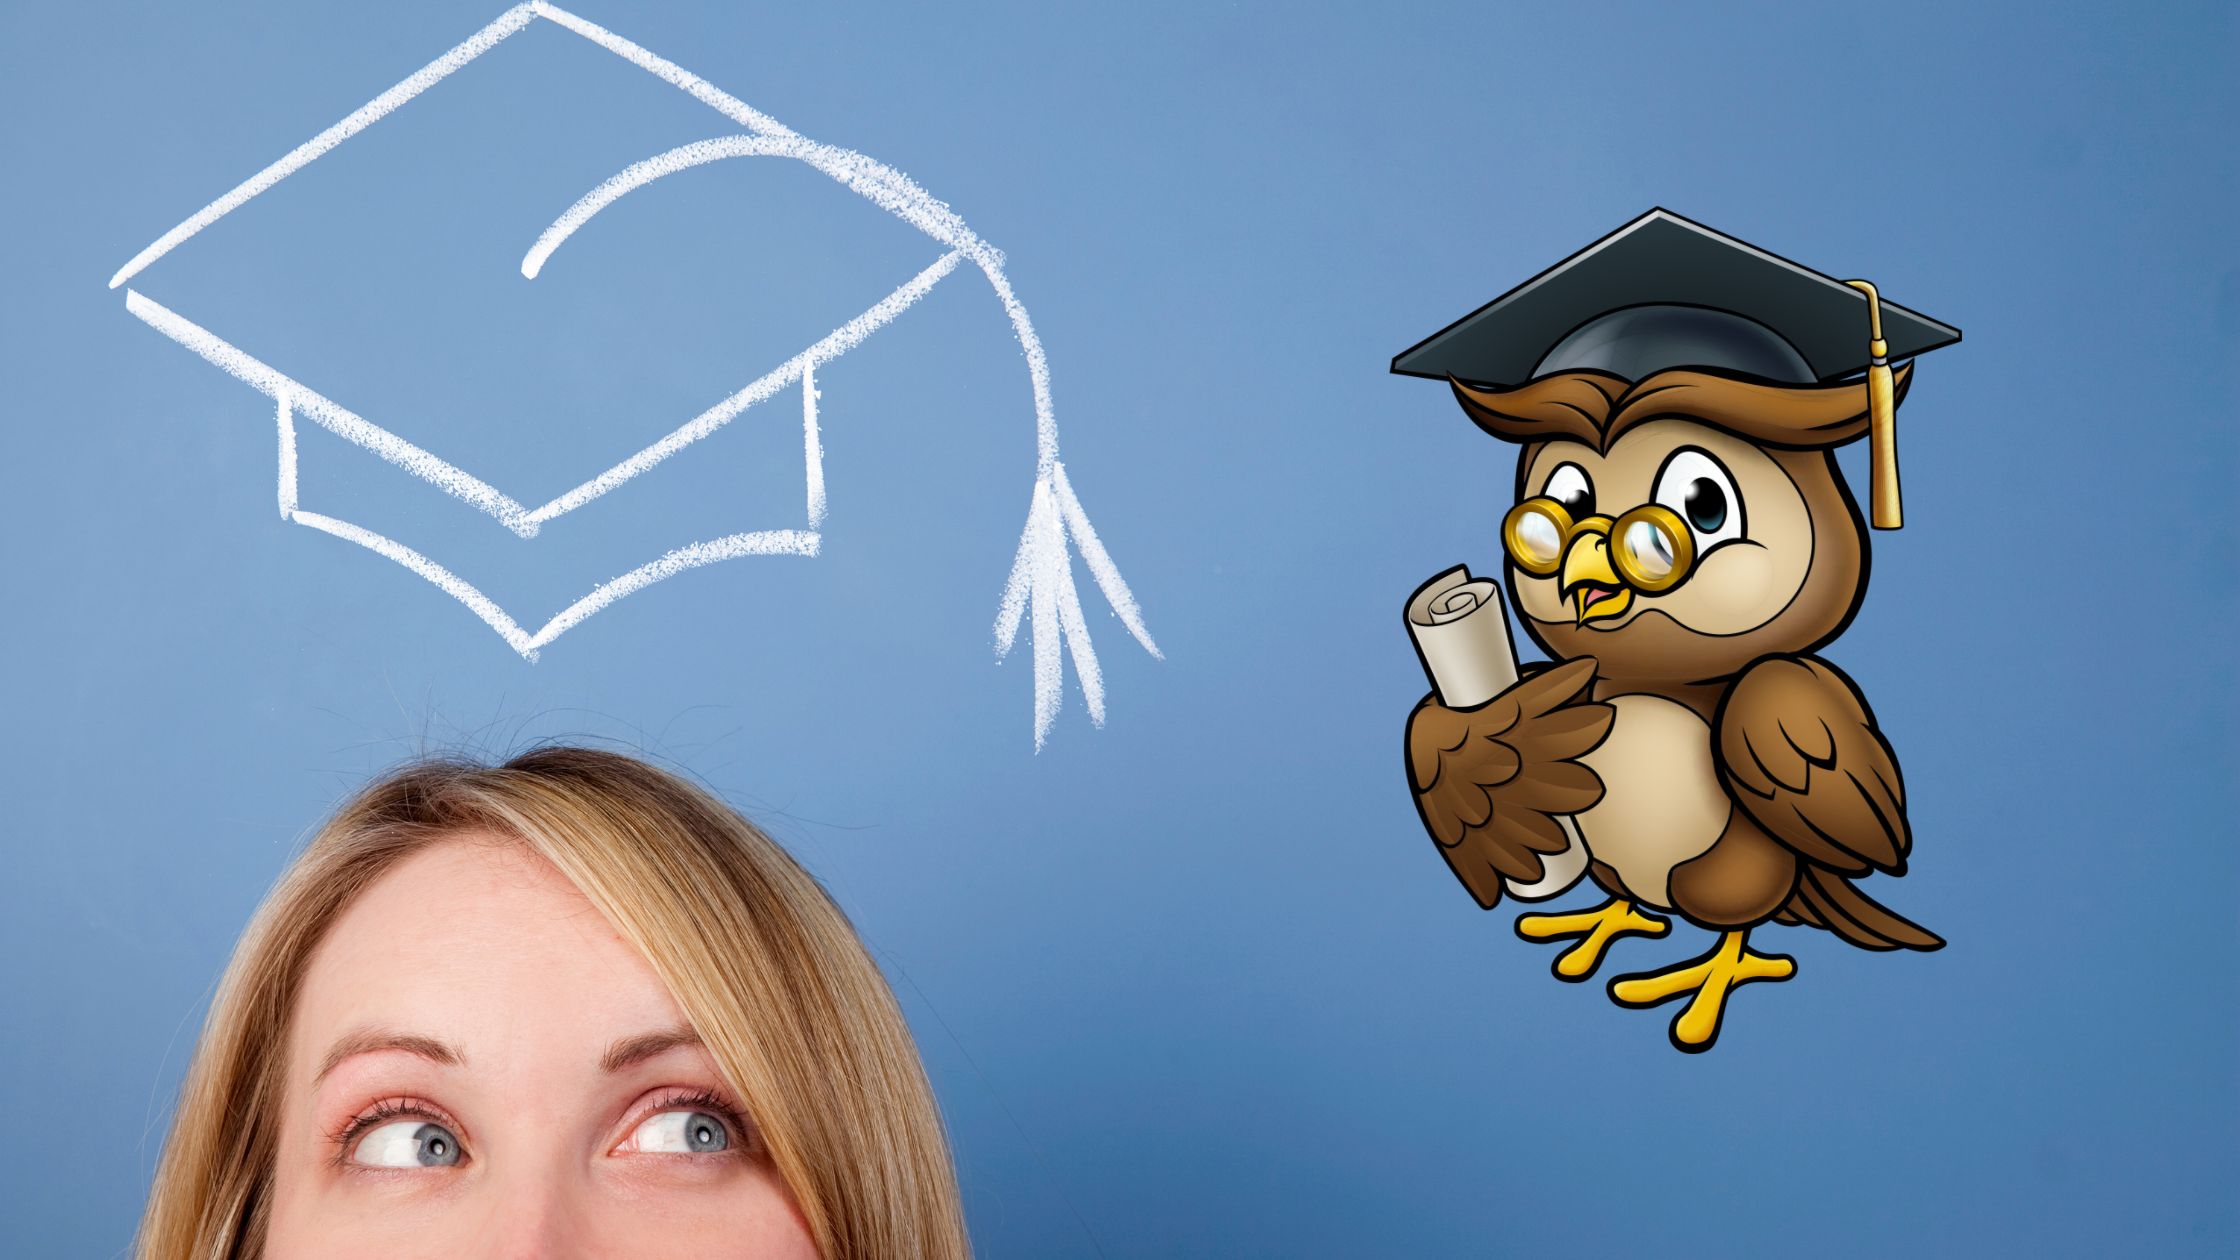 Meaning behind the graduate owl